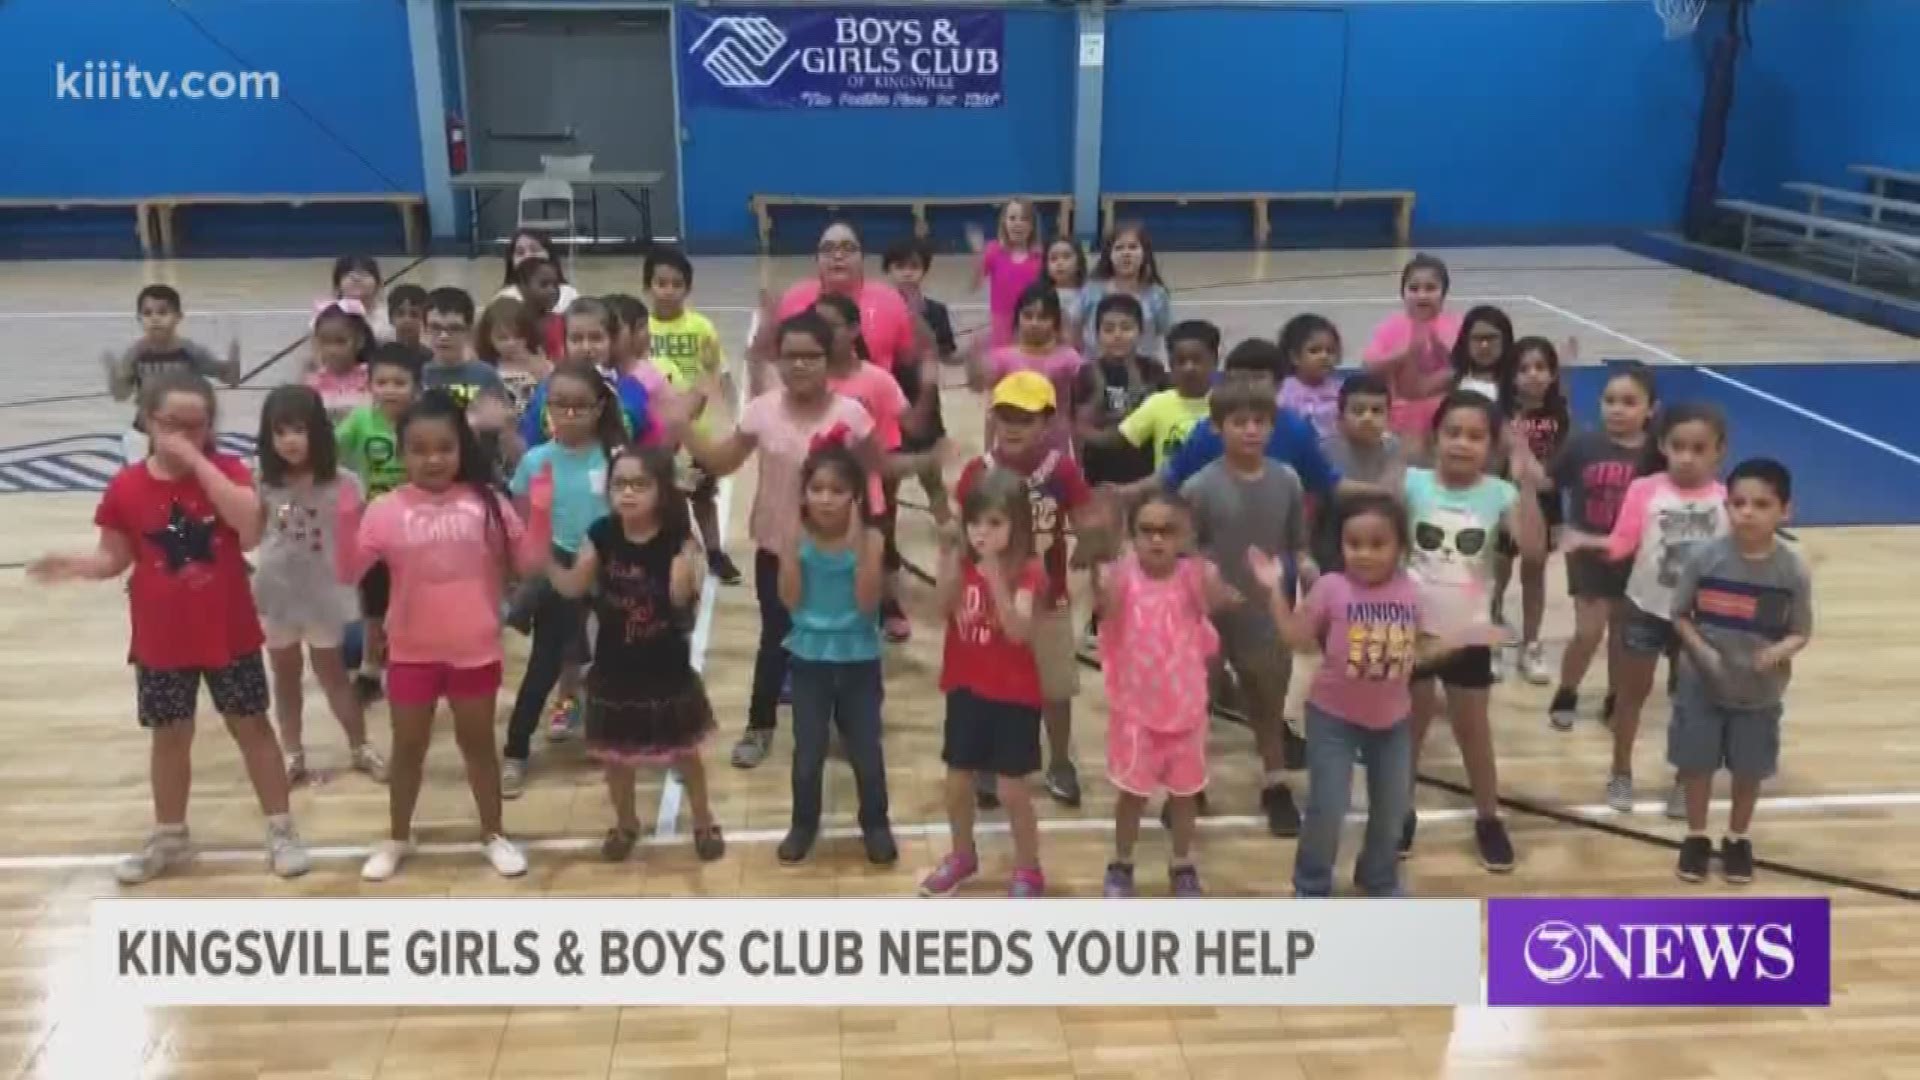 The Boys and Girls Club has programs such as academic tutoring, holiday parties, and sports.